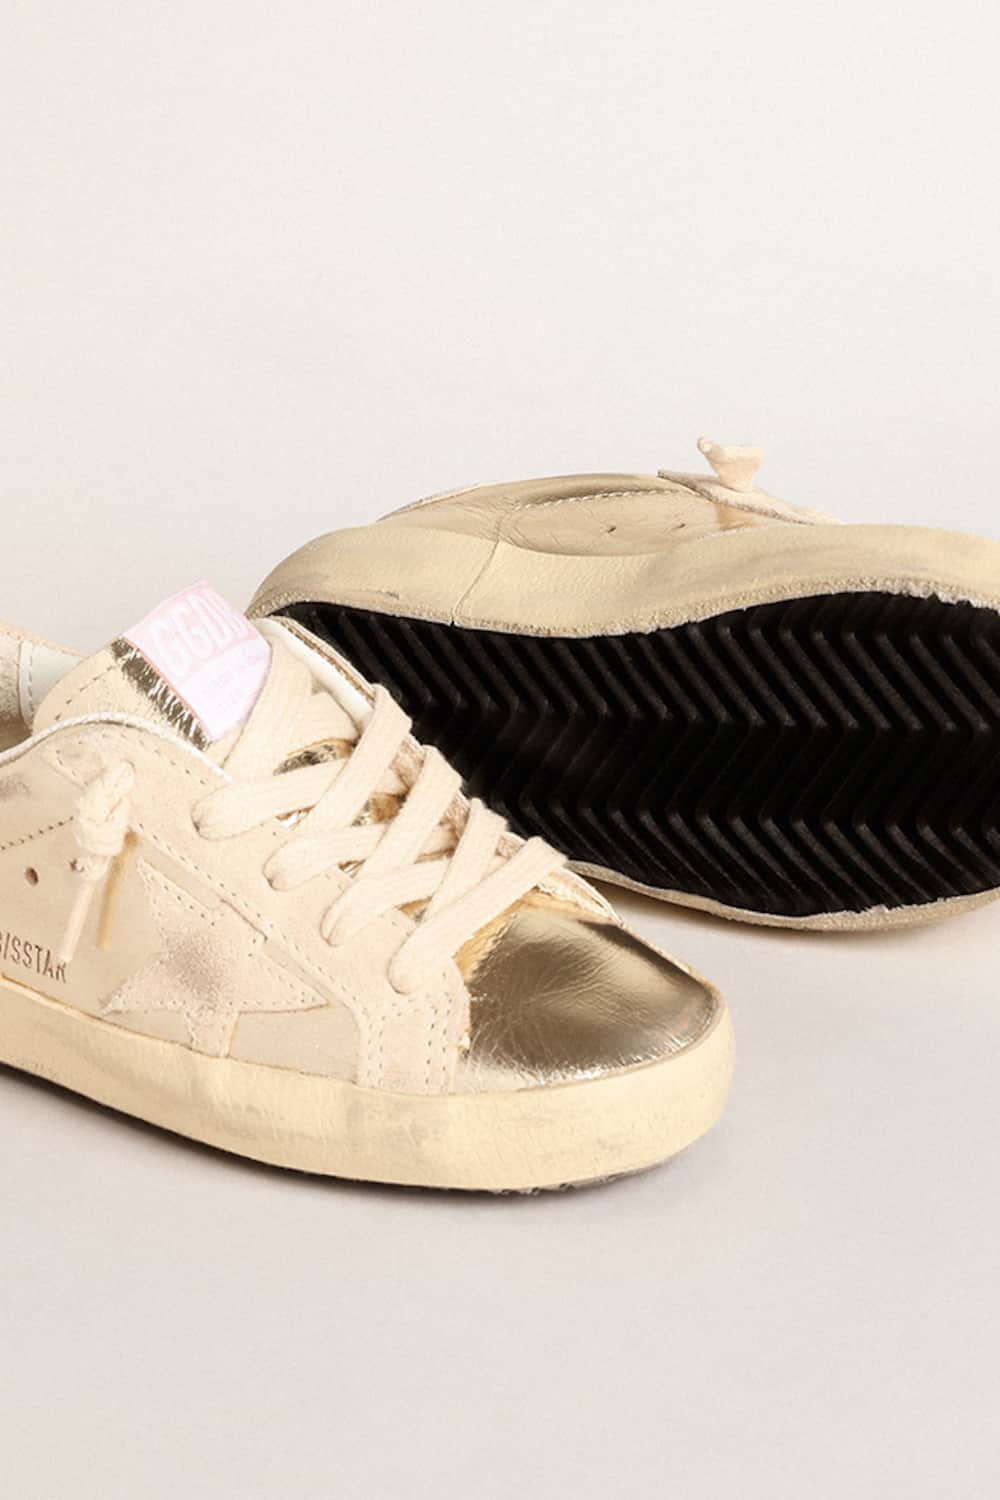 Golden Goose - Young Super-Star in platinum metallic leather with suede star and heel tab in 